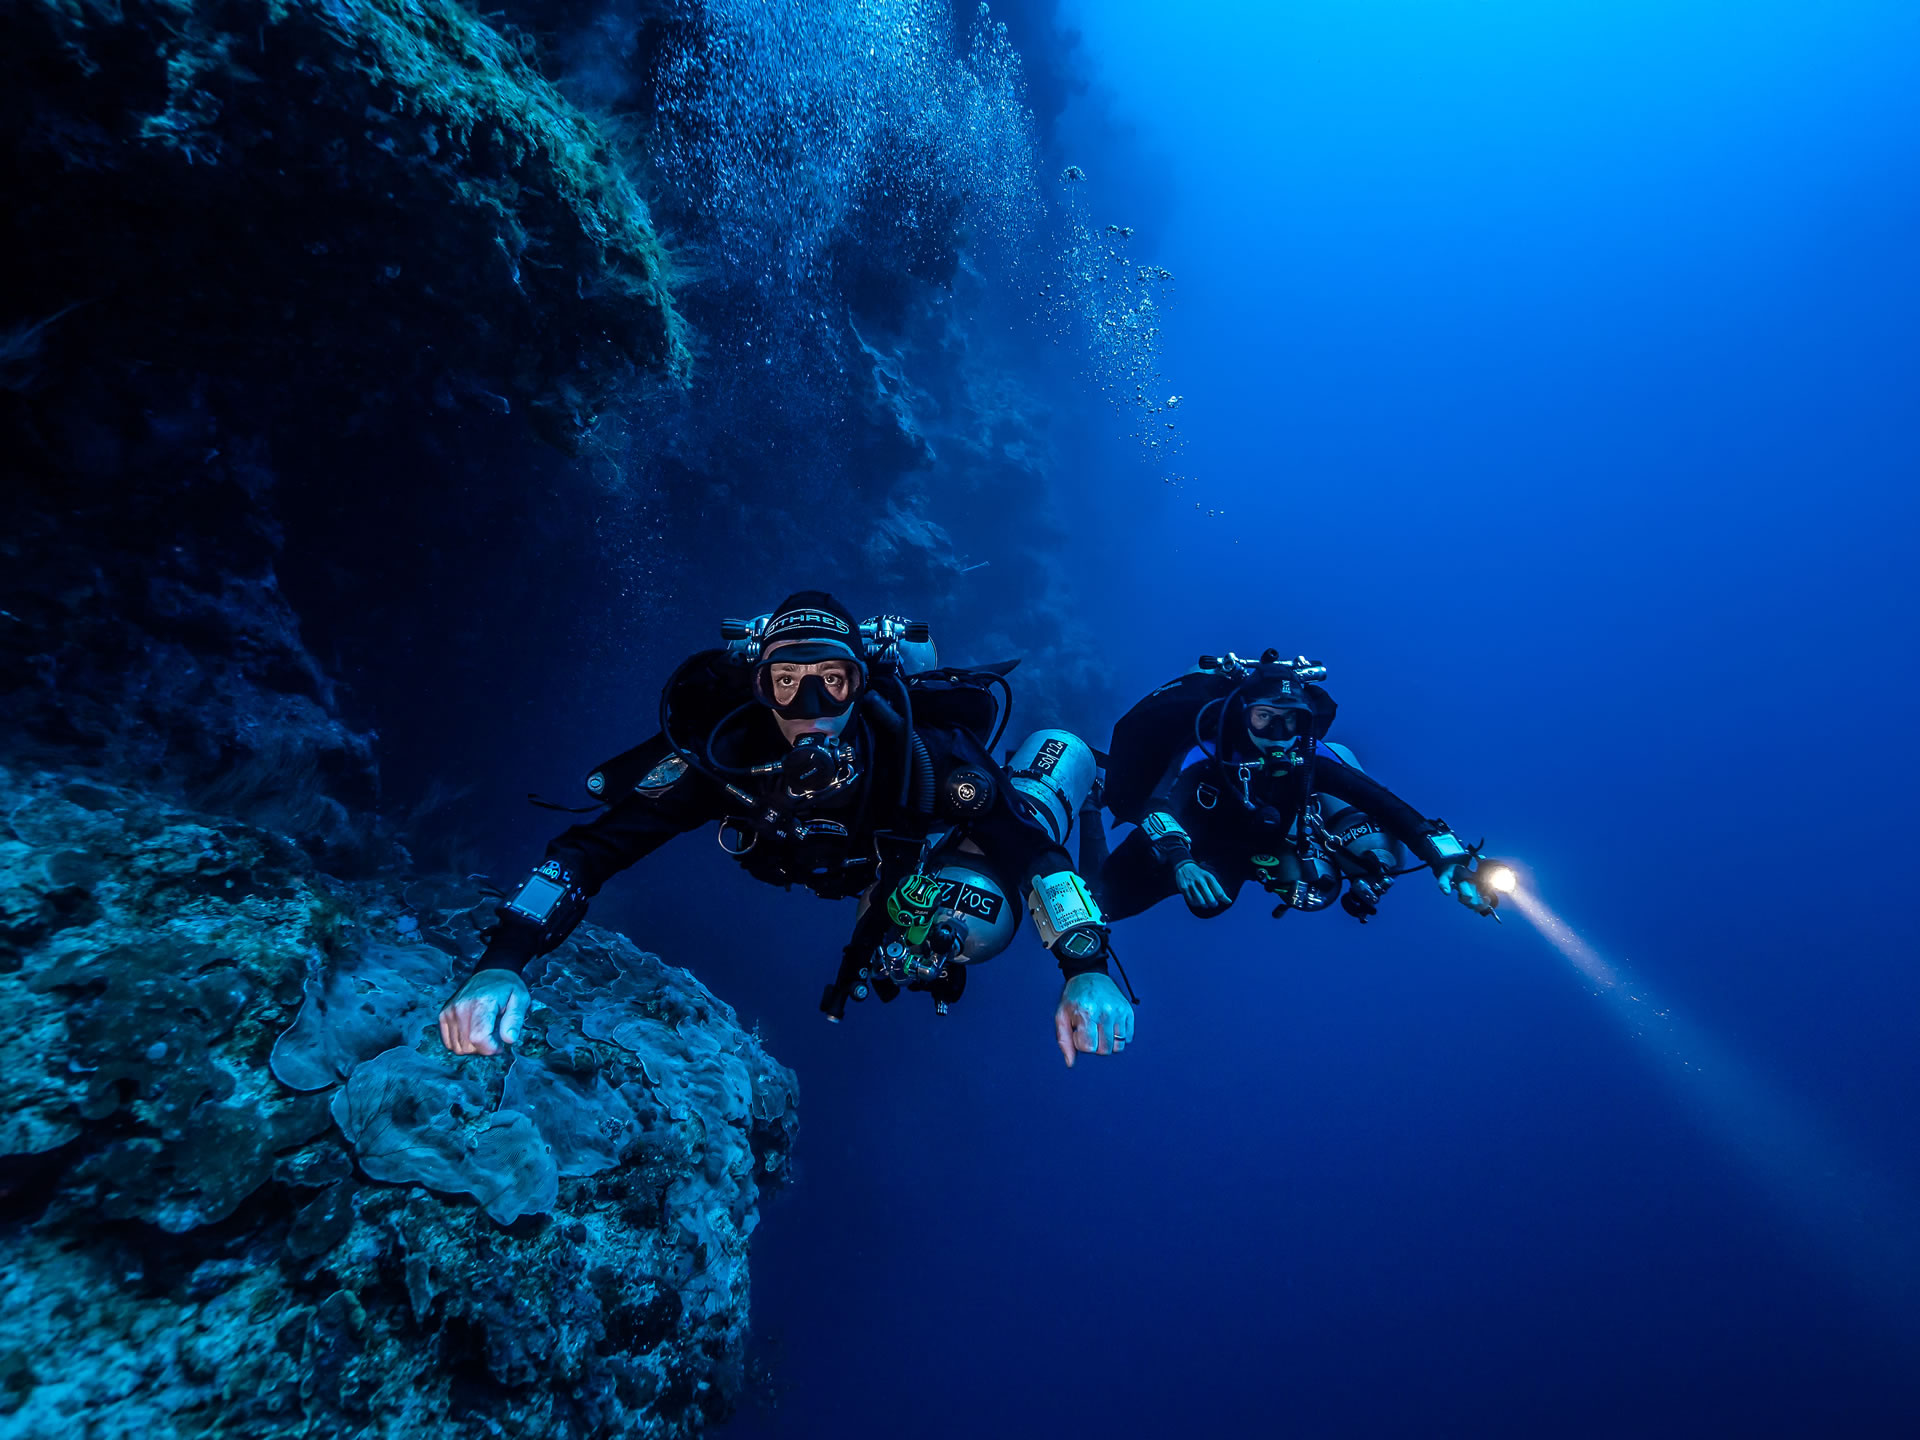 Diving: Technical divers equipped with professional rebreather scuba sets. 1920x1440 HD Wallpaper.